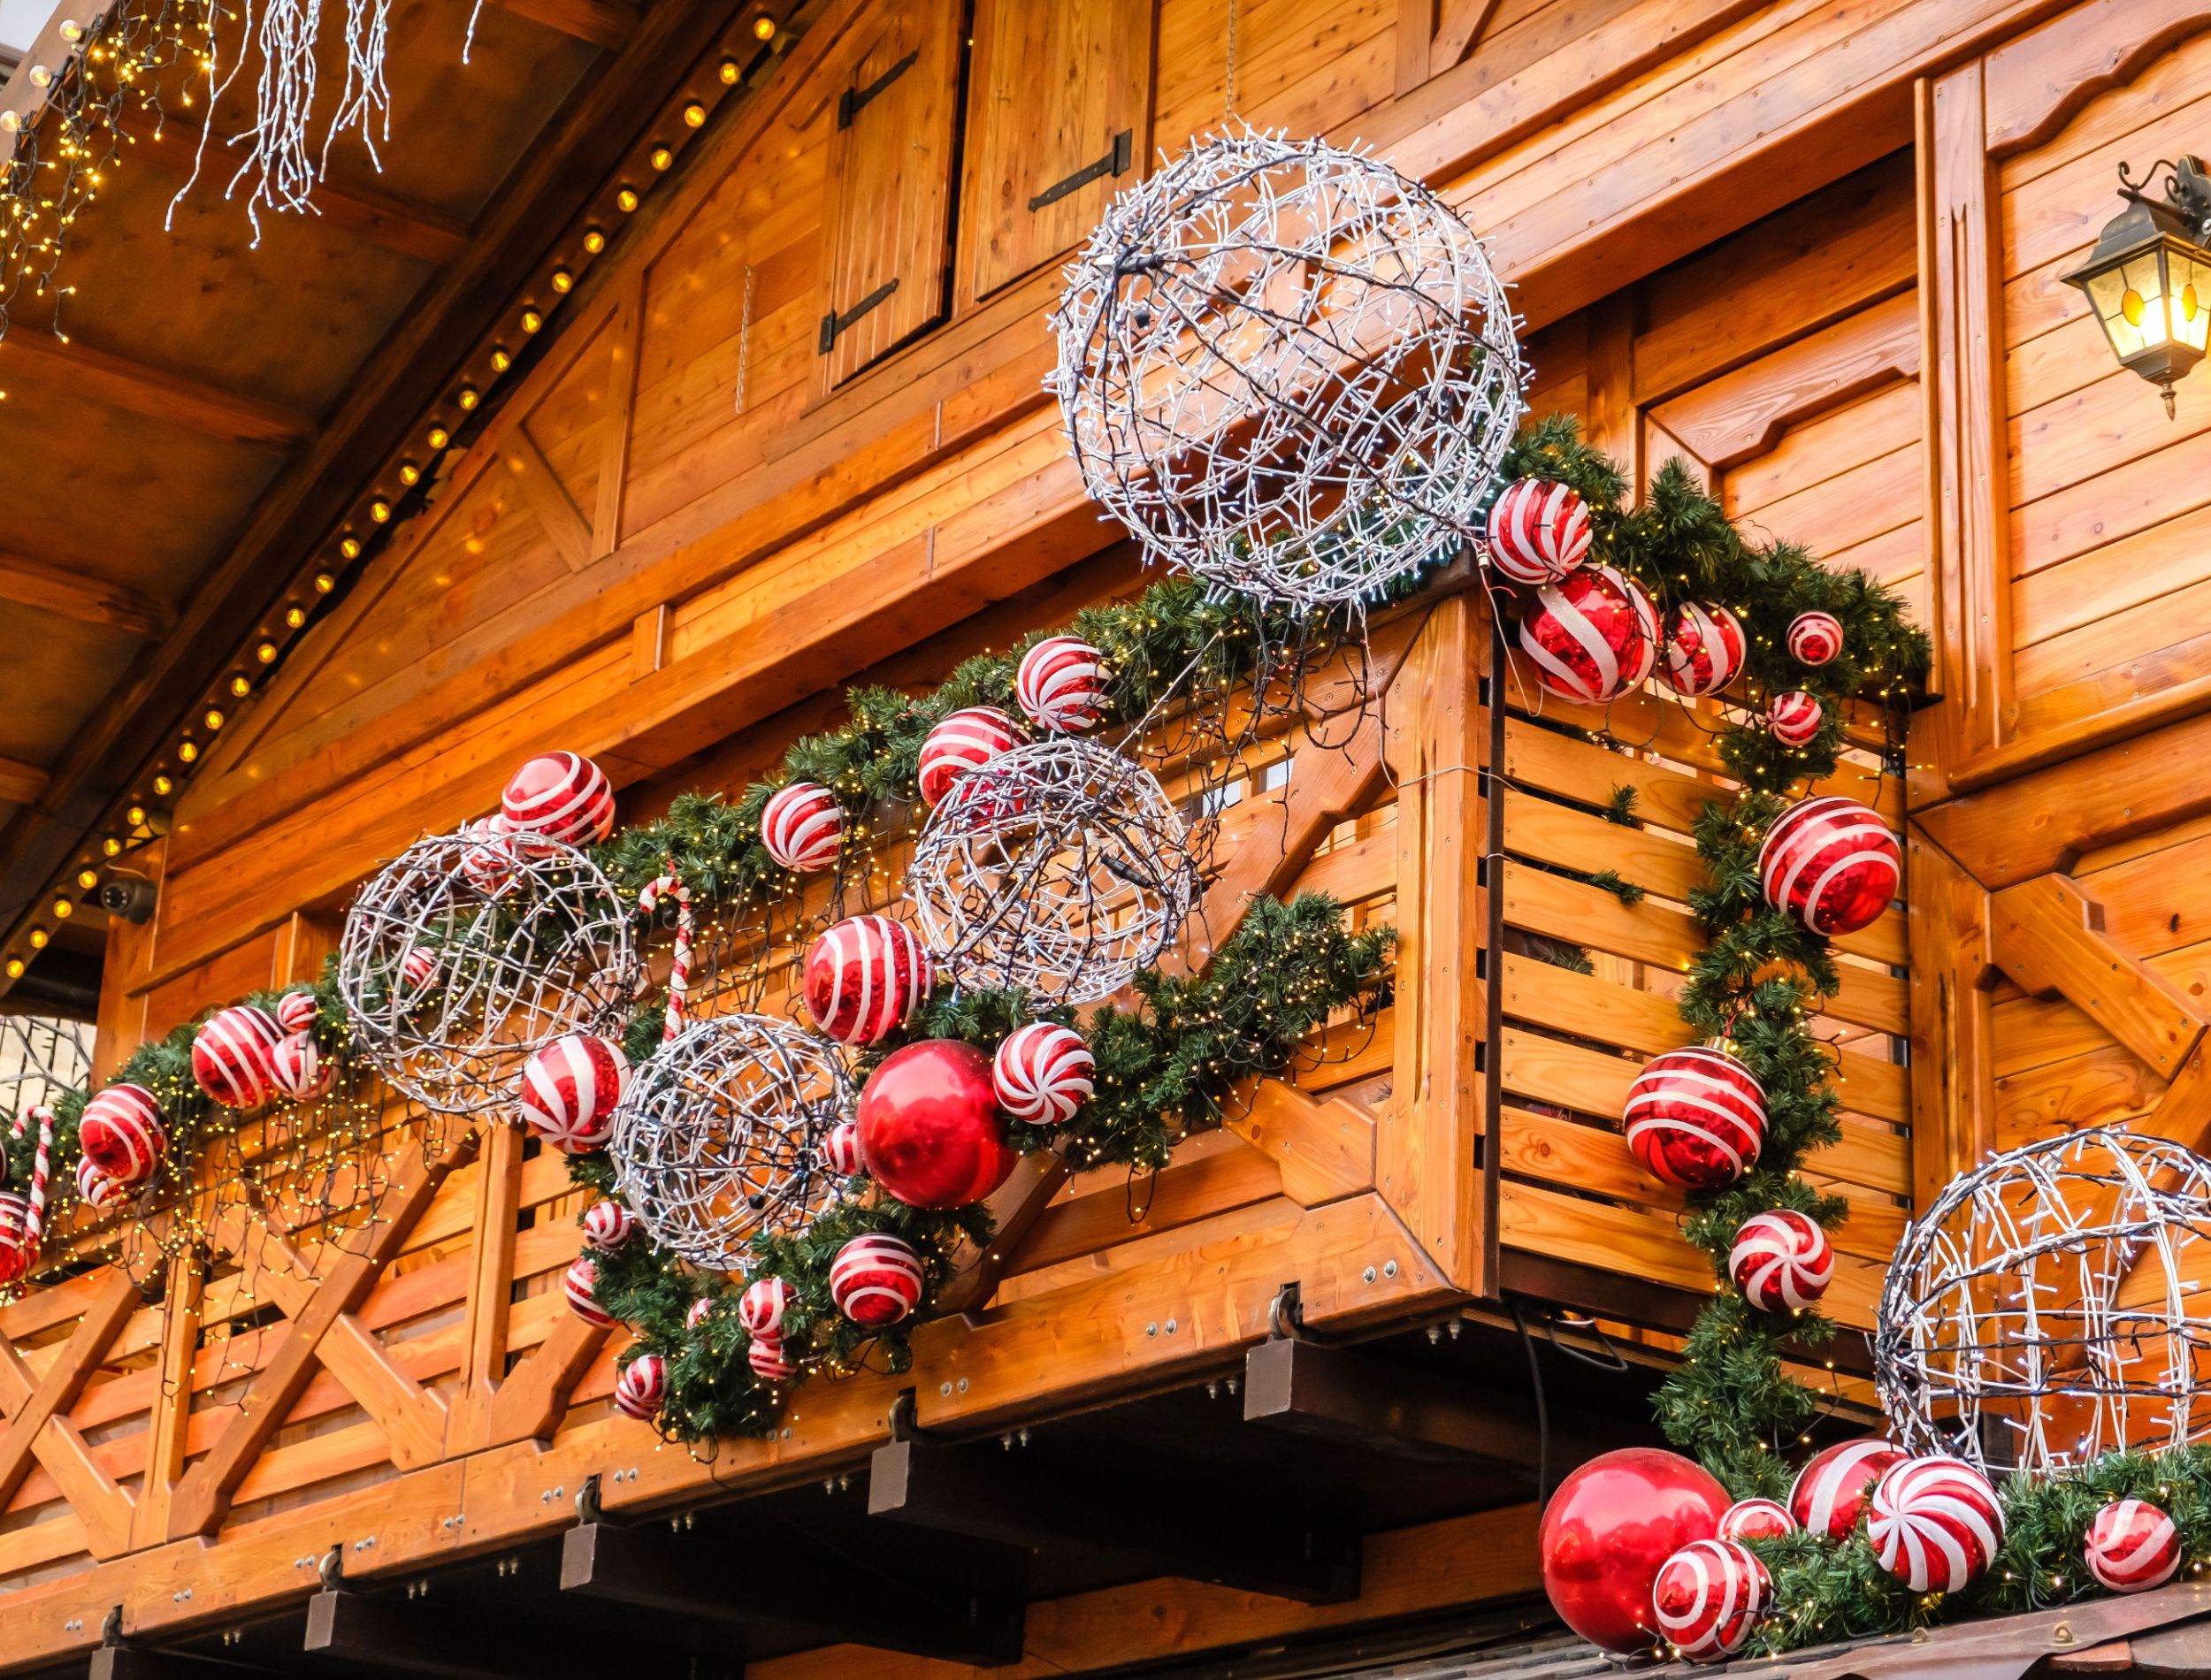 Balcony of Wooden Vintage Building Decorated of Artificial Fir Tree with Garland and many Red and White Christmas Balls at Winter Day, no Snow.